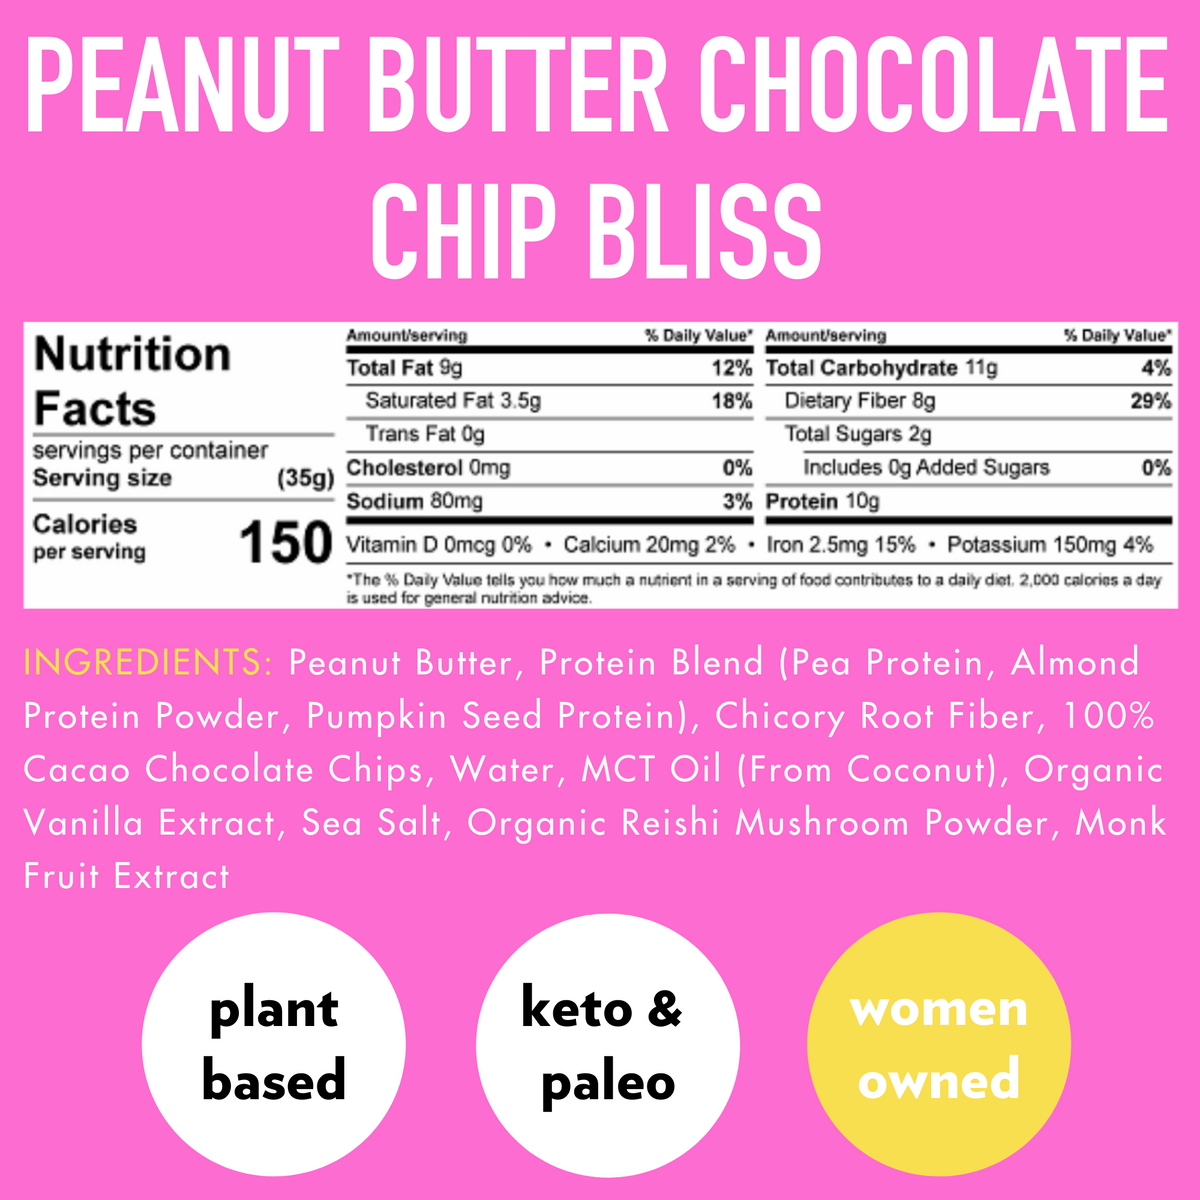 Peanut Butter Chocolate Chip BLISS (12 Count) 🥜 by B.T.R. Bar